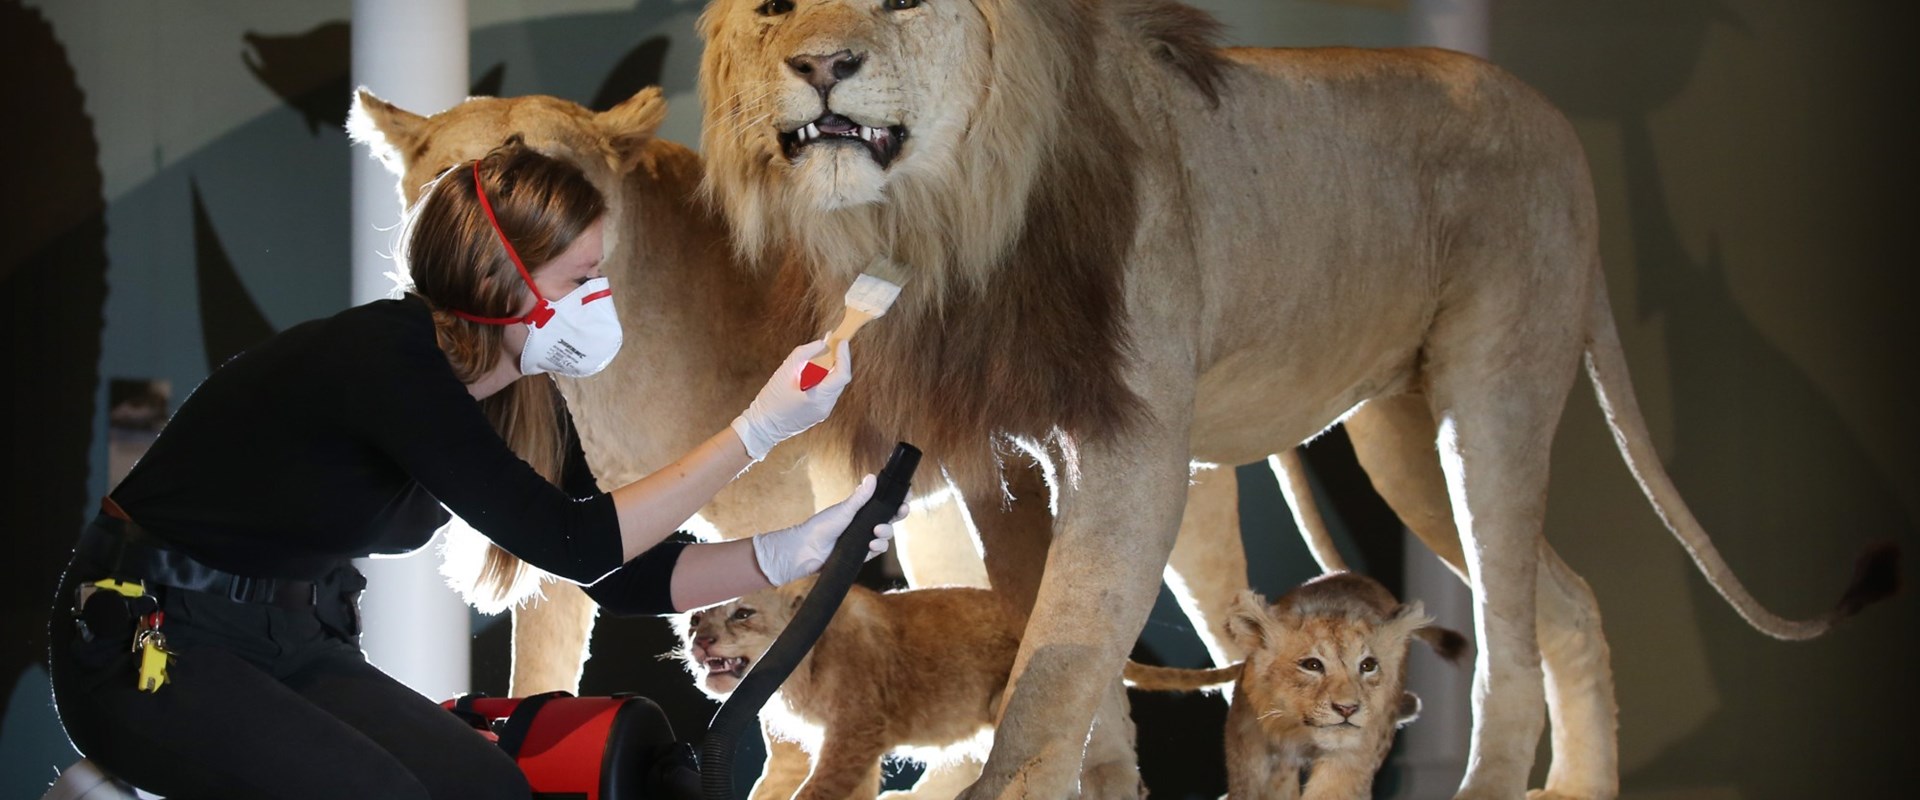 A person in a dust mask brushes dust out of a lion's mane with a paintbrush.